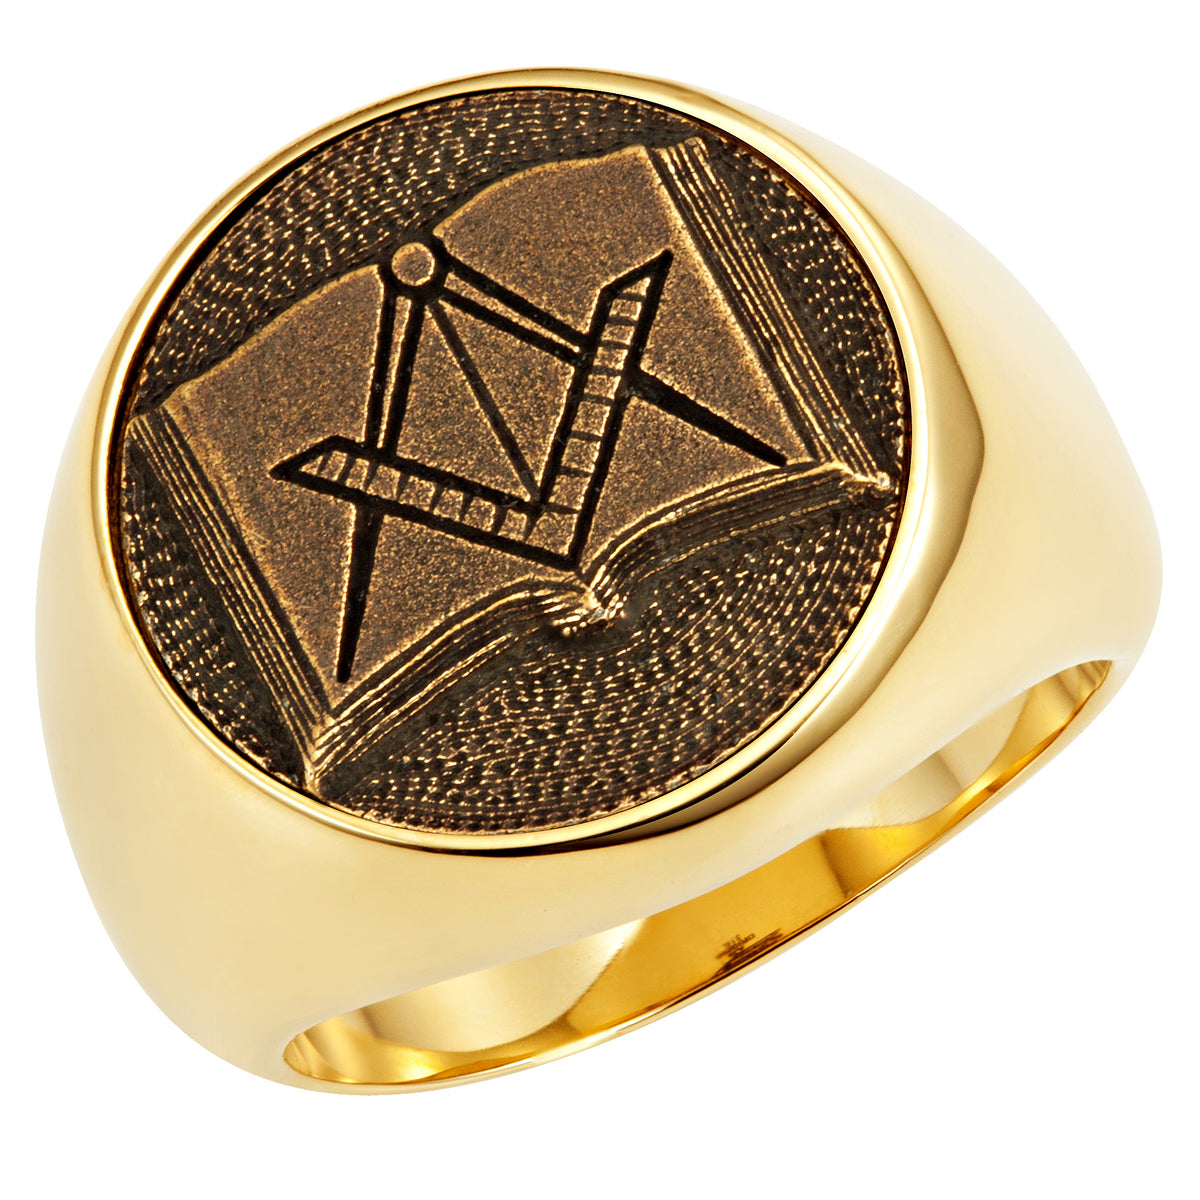 Stainless Steel Masonic Ring with Emblem and Open Bible - Gold Color